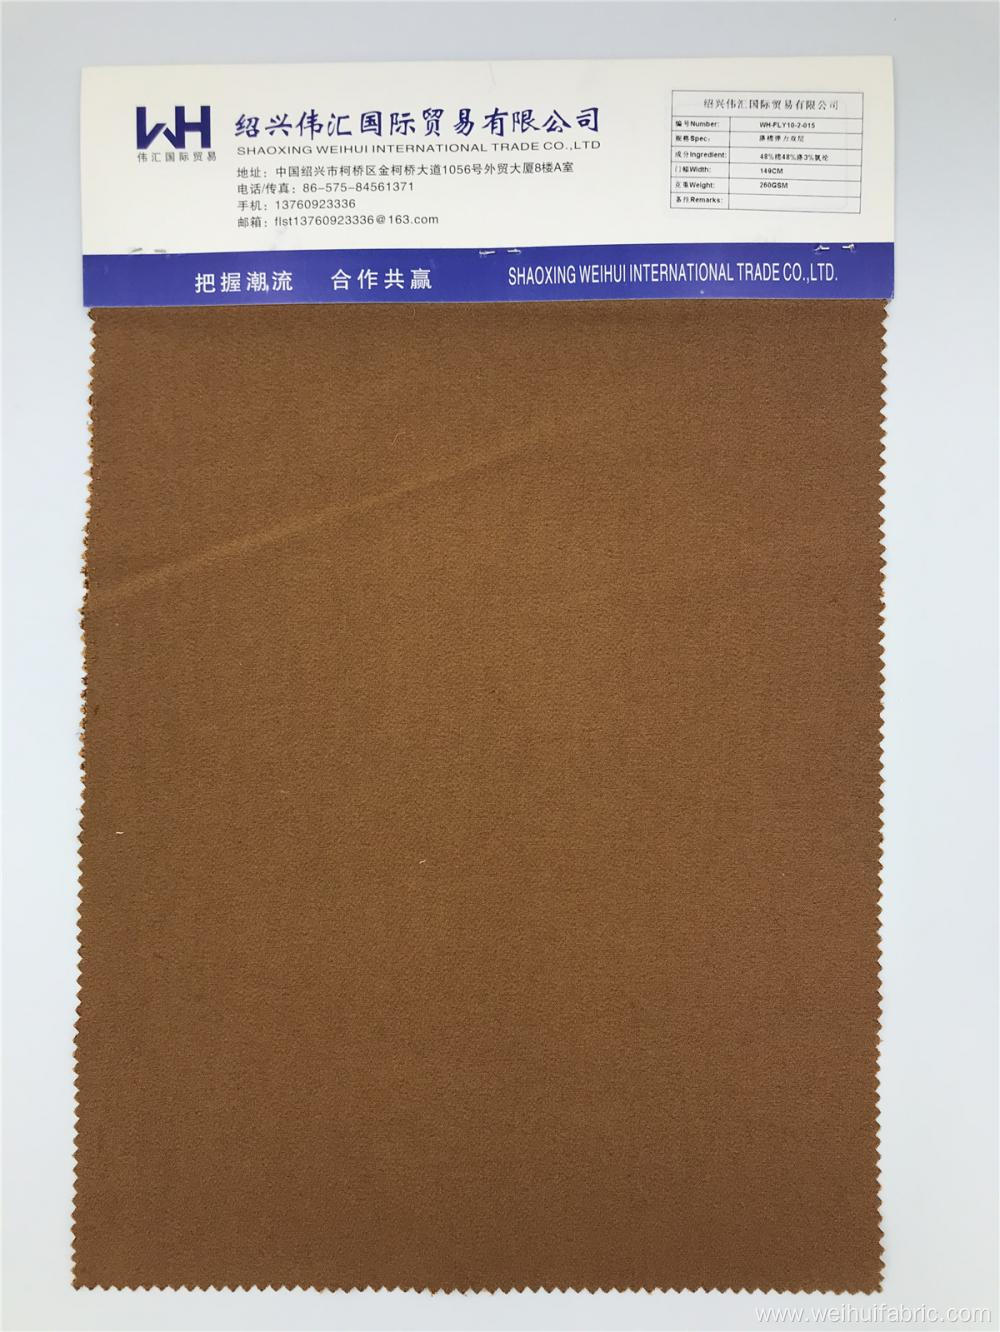 High Quality Two Thicknesses Brown Plain Fabrics